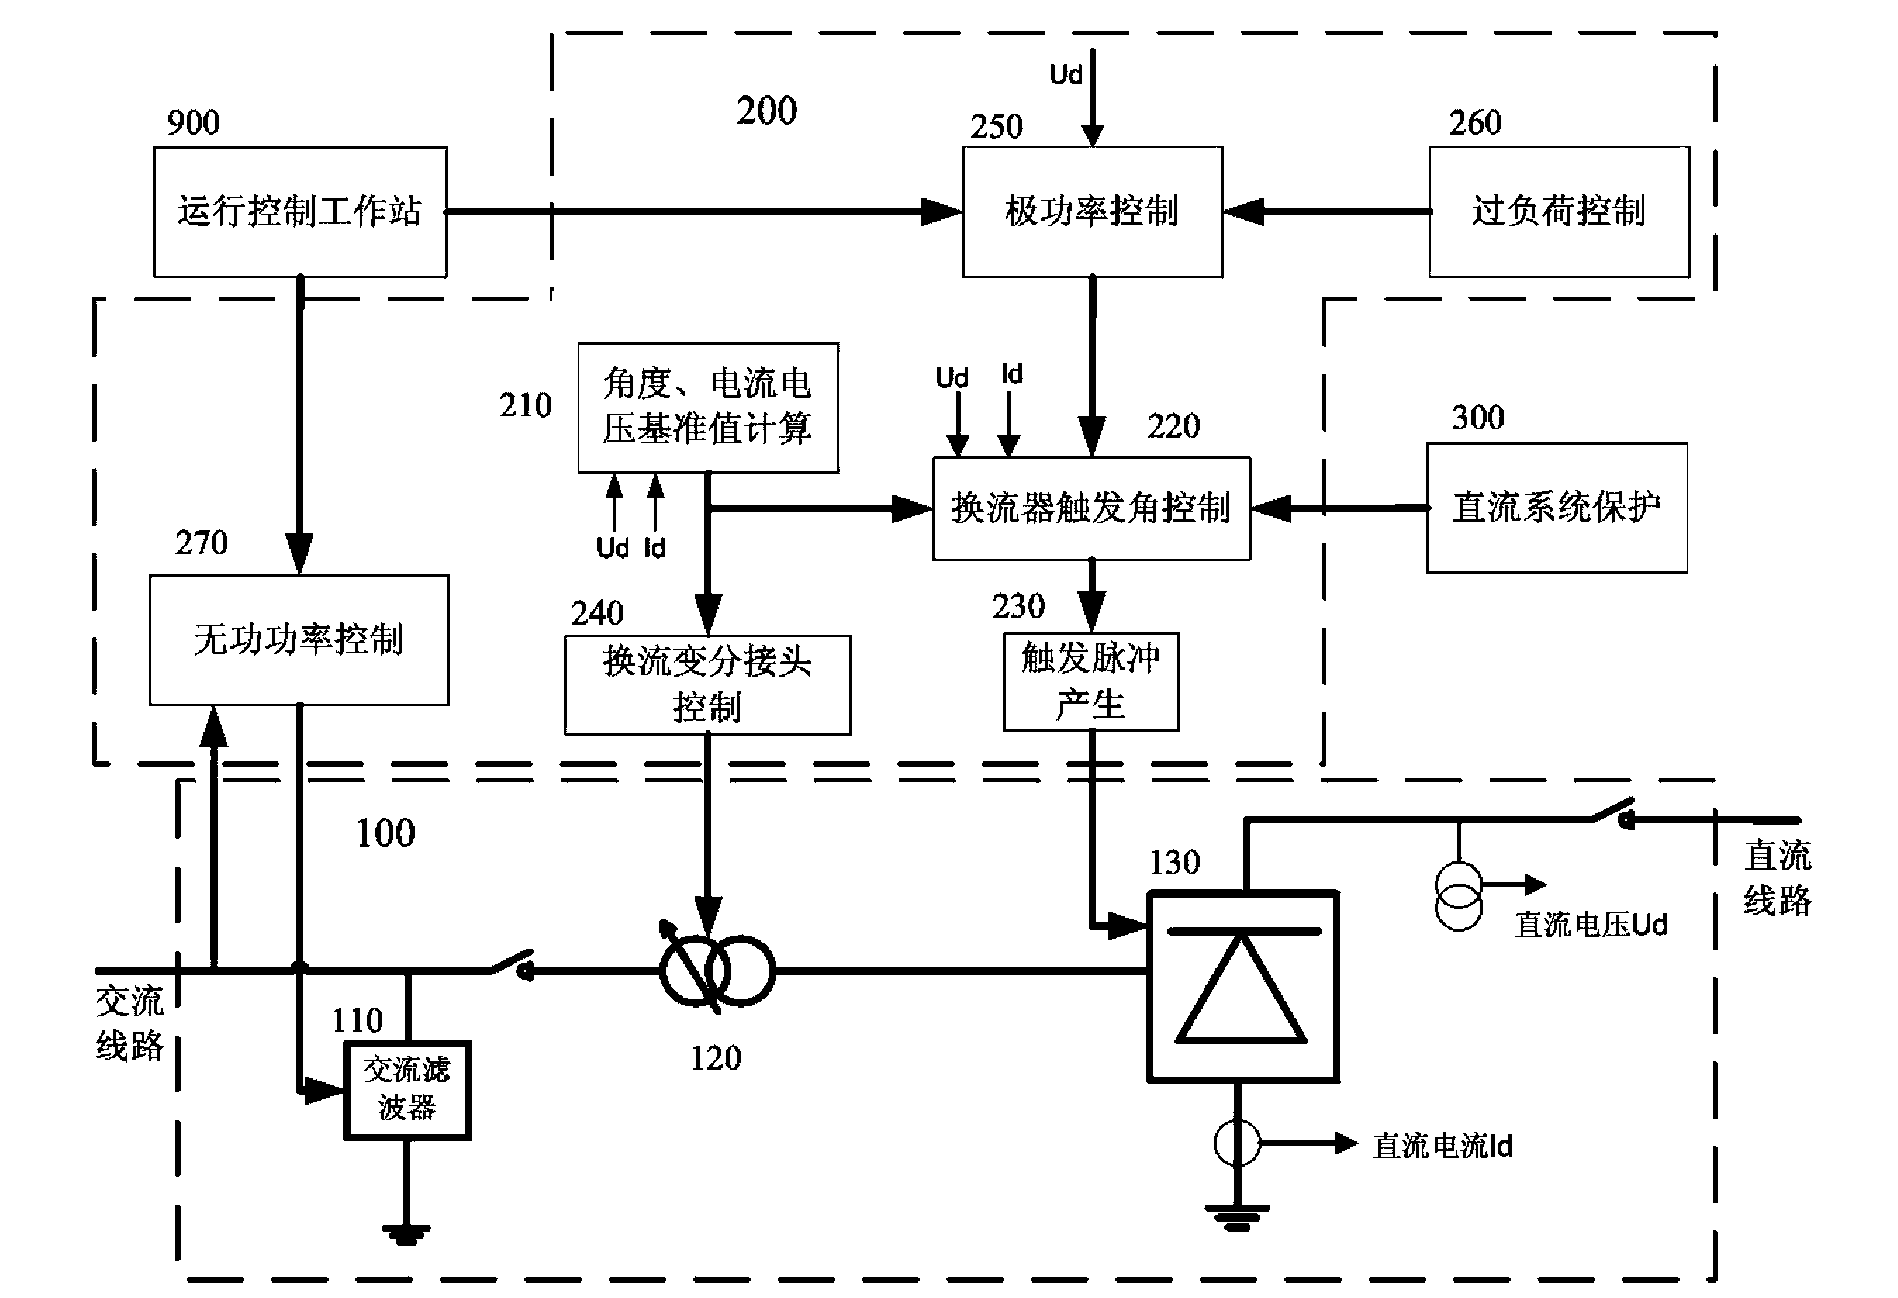 Overcurrent protection simulation device